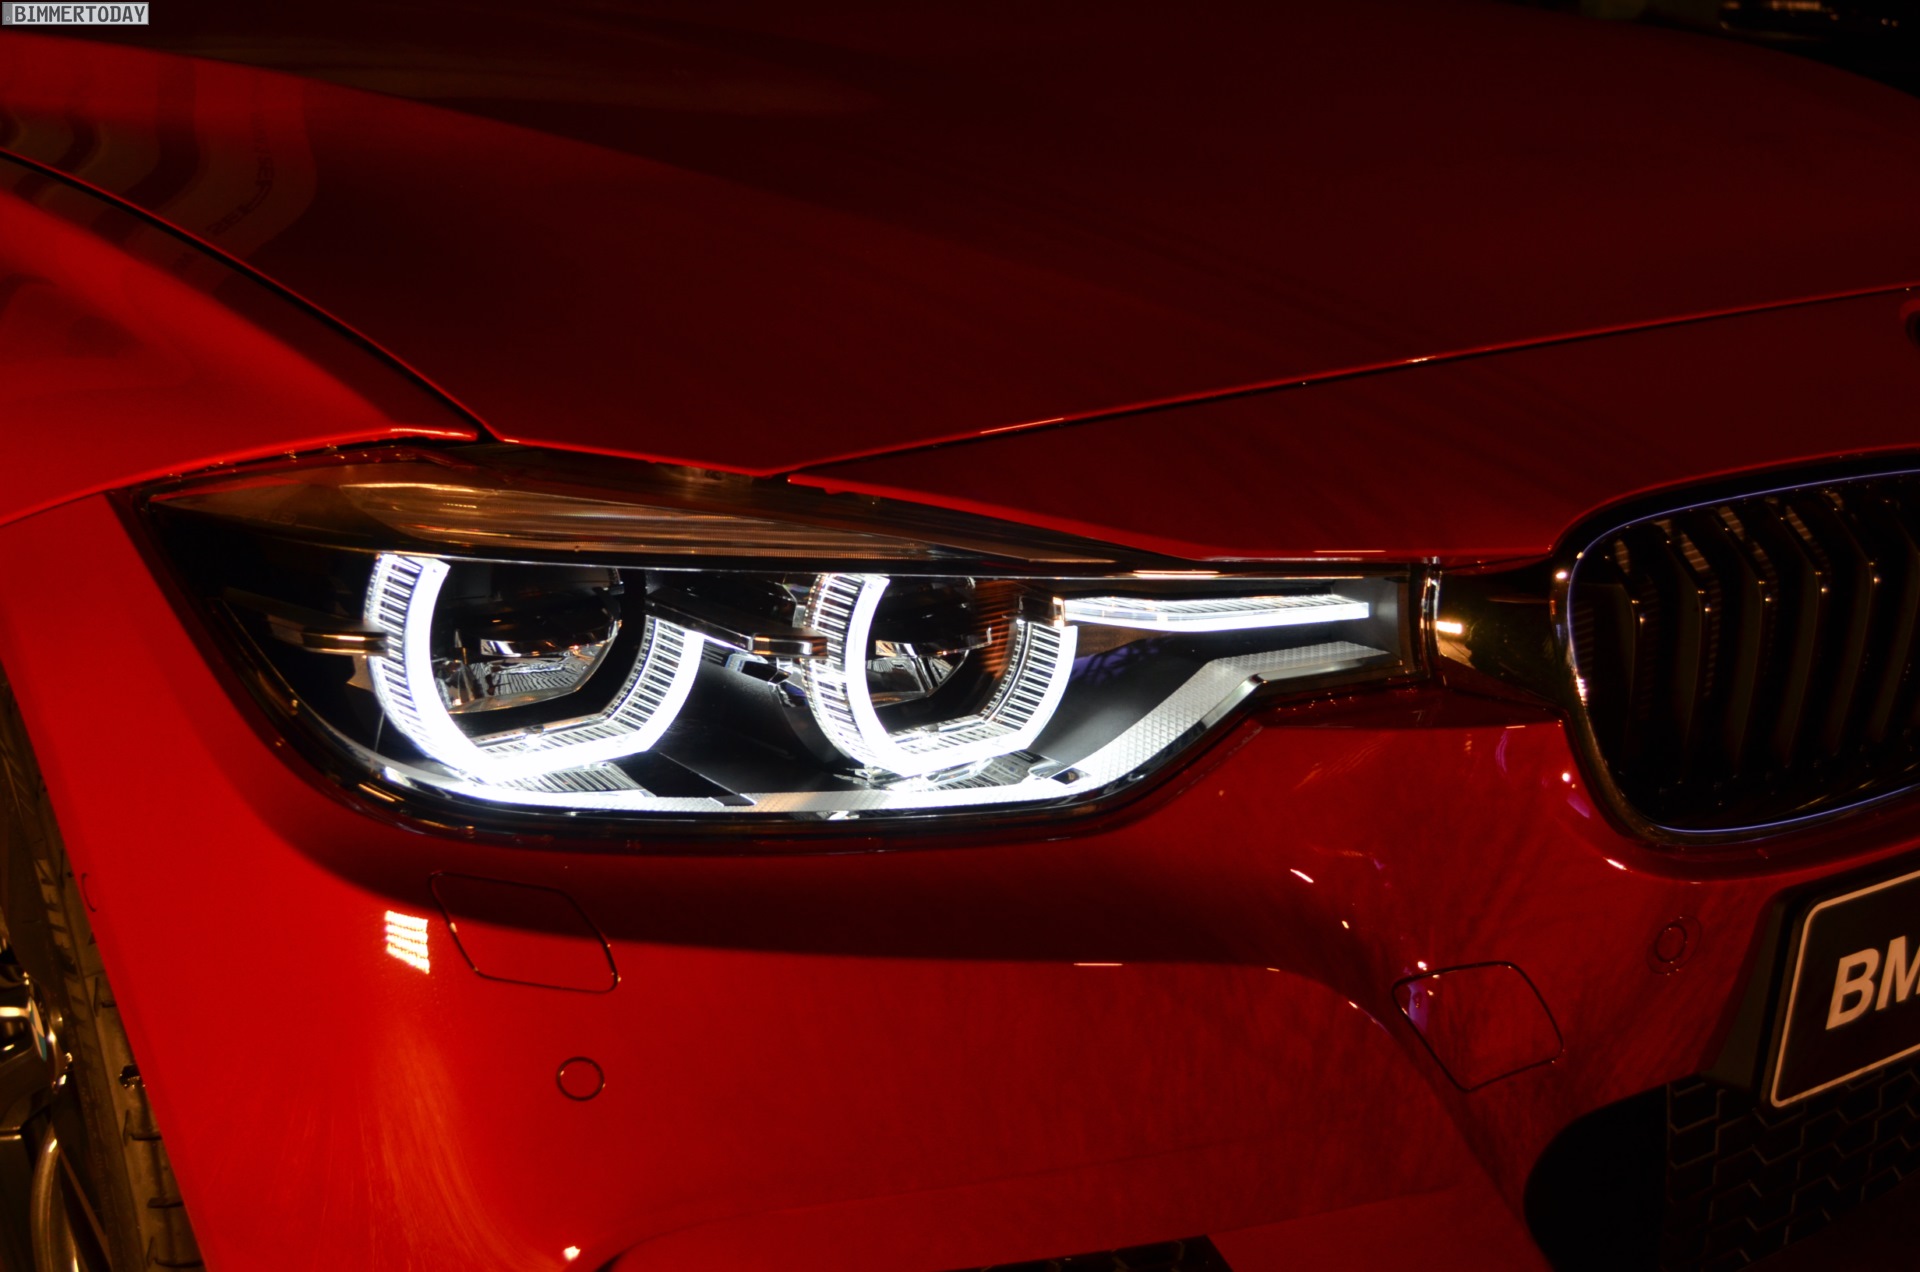 See the lights of 2015 BMW